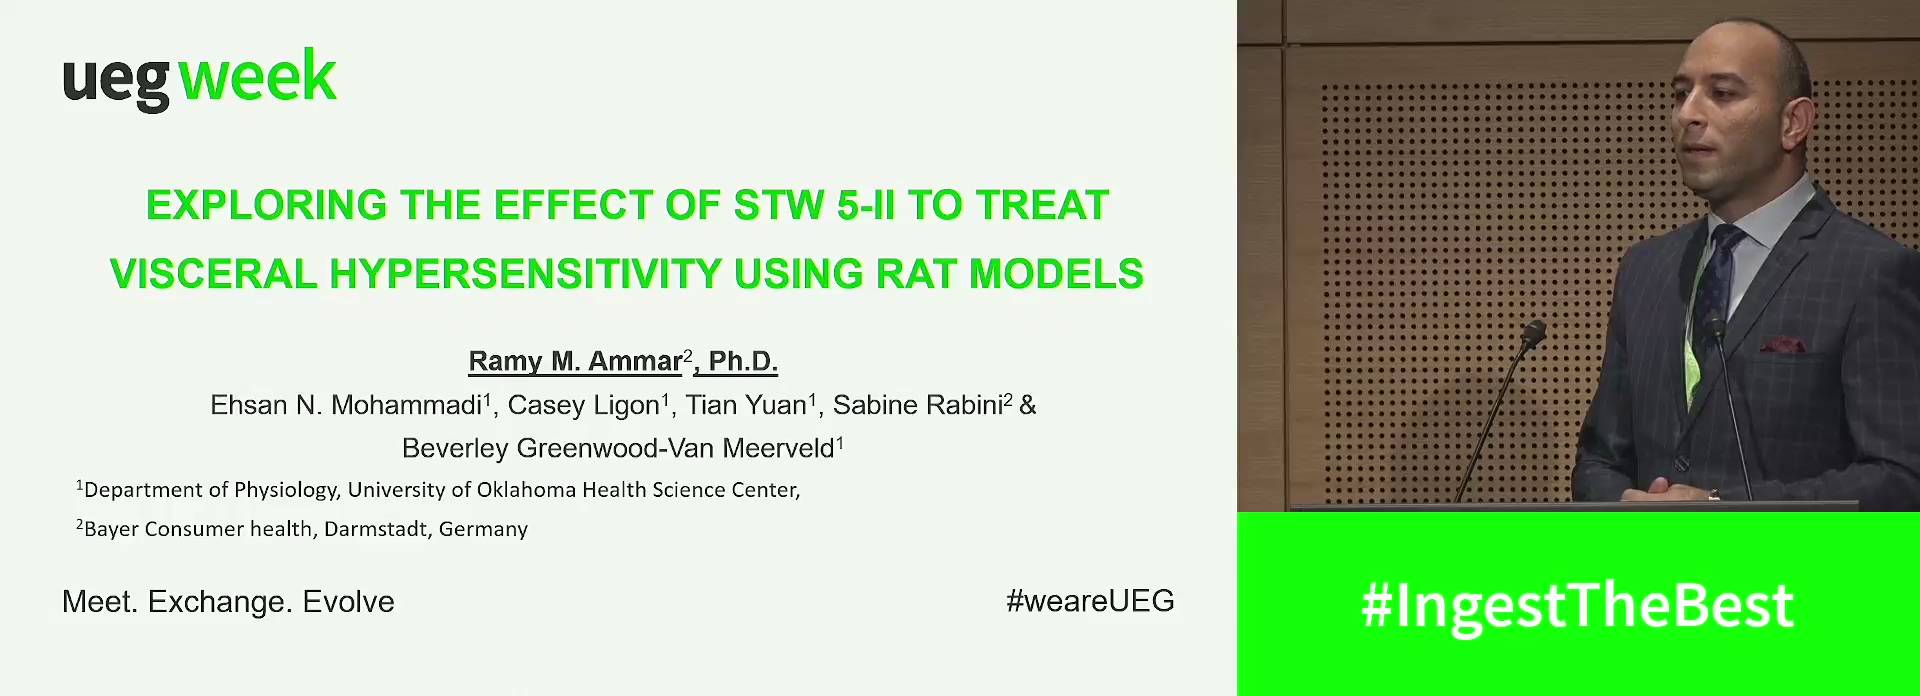 EXPLORING THE EFFECT OF STW 5-II TO TREAT VISCERAL HYPERSENSITIVITY USING RAT MODELS